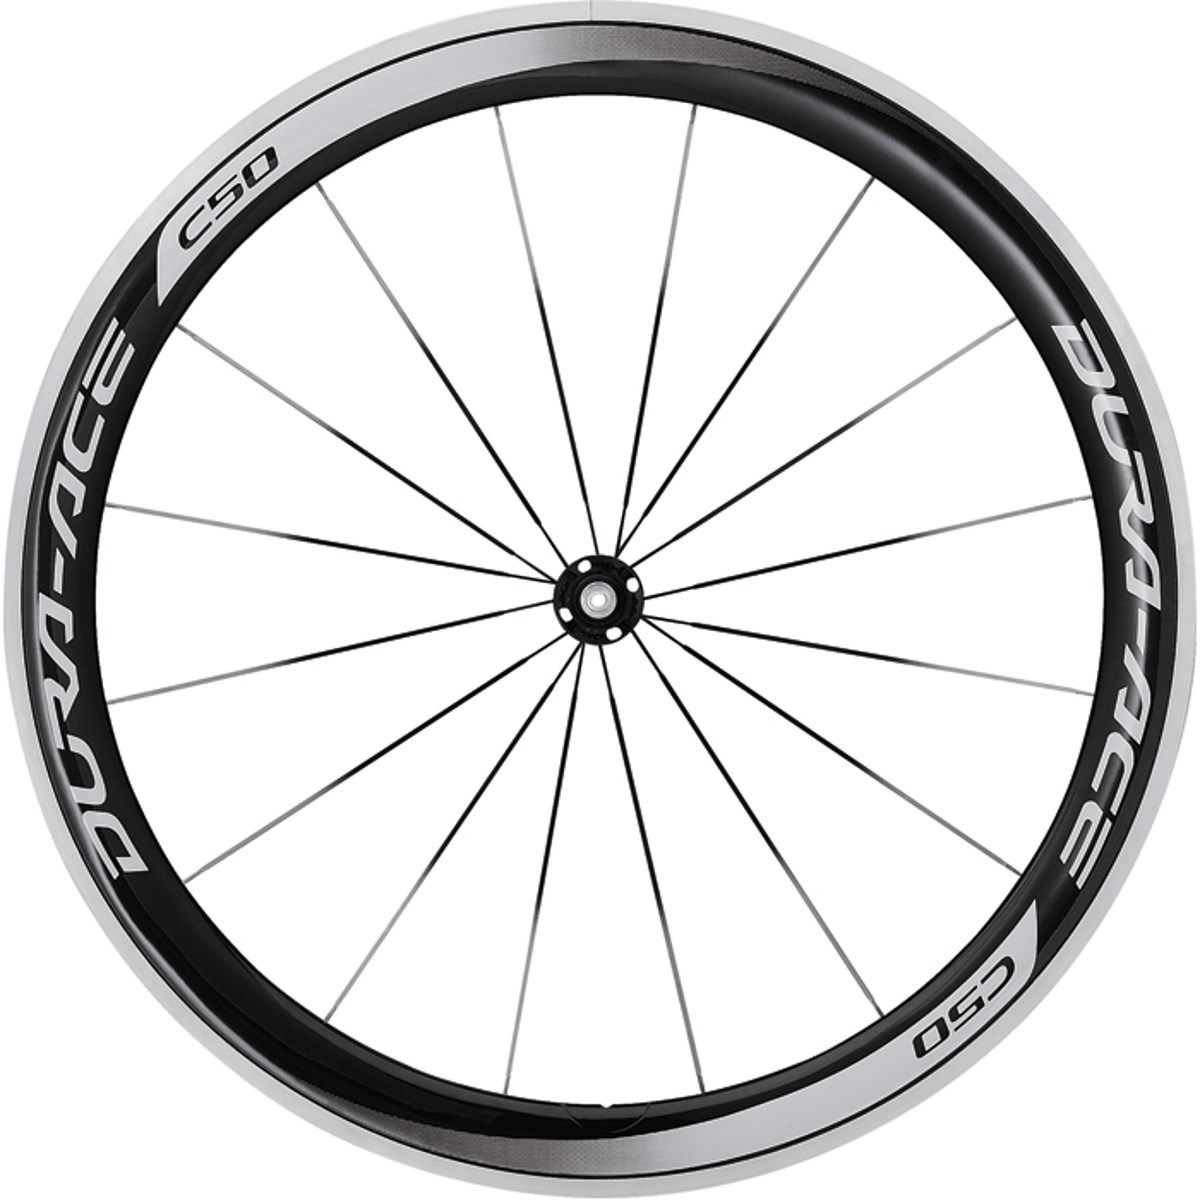 Shimano WH-9000 Dura-Ace C50-CL Carbon Clincher 50mm Front Road Wheel product image